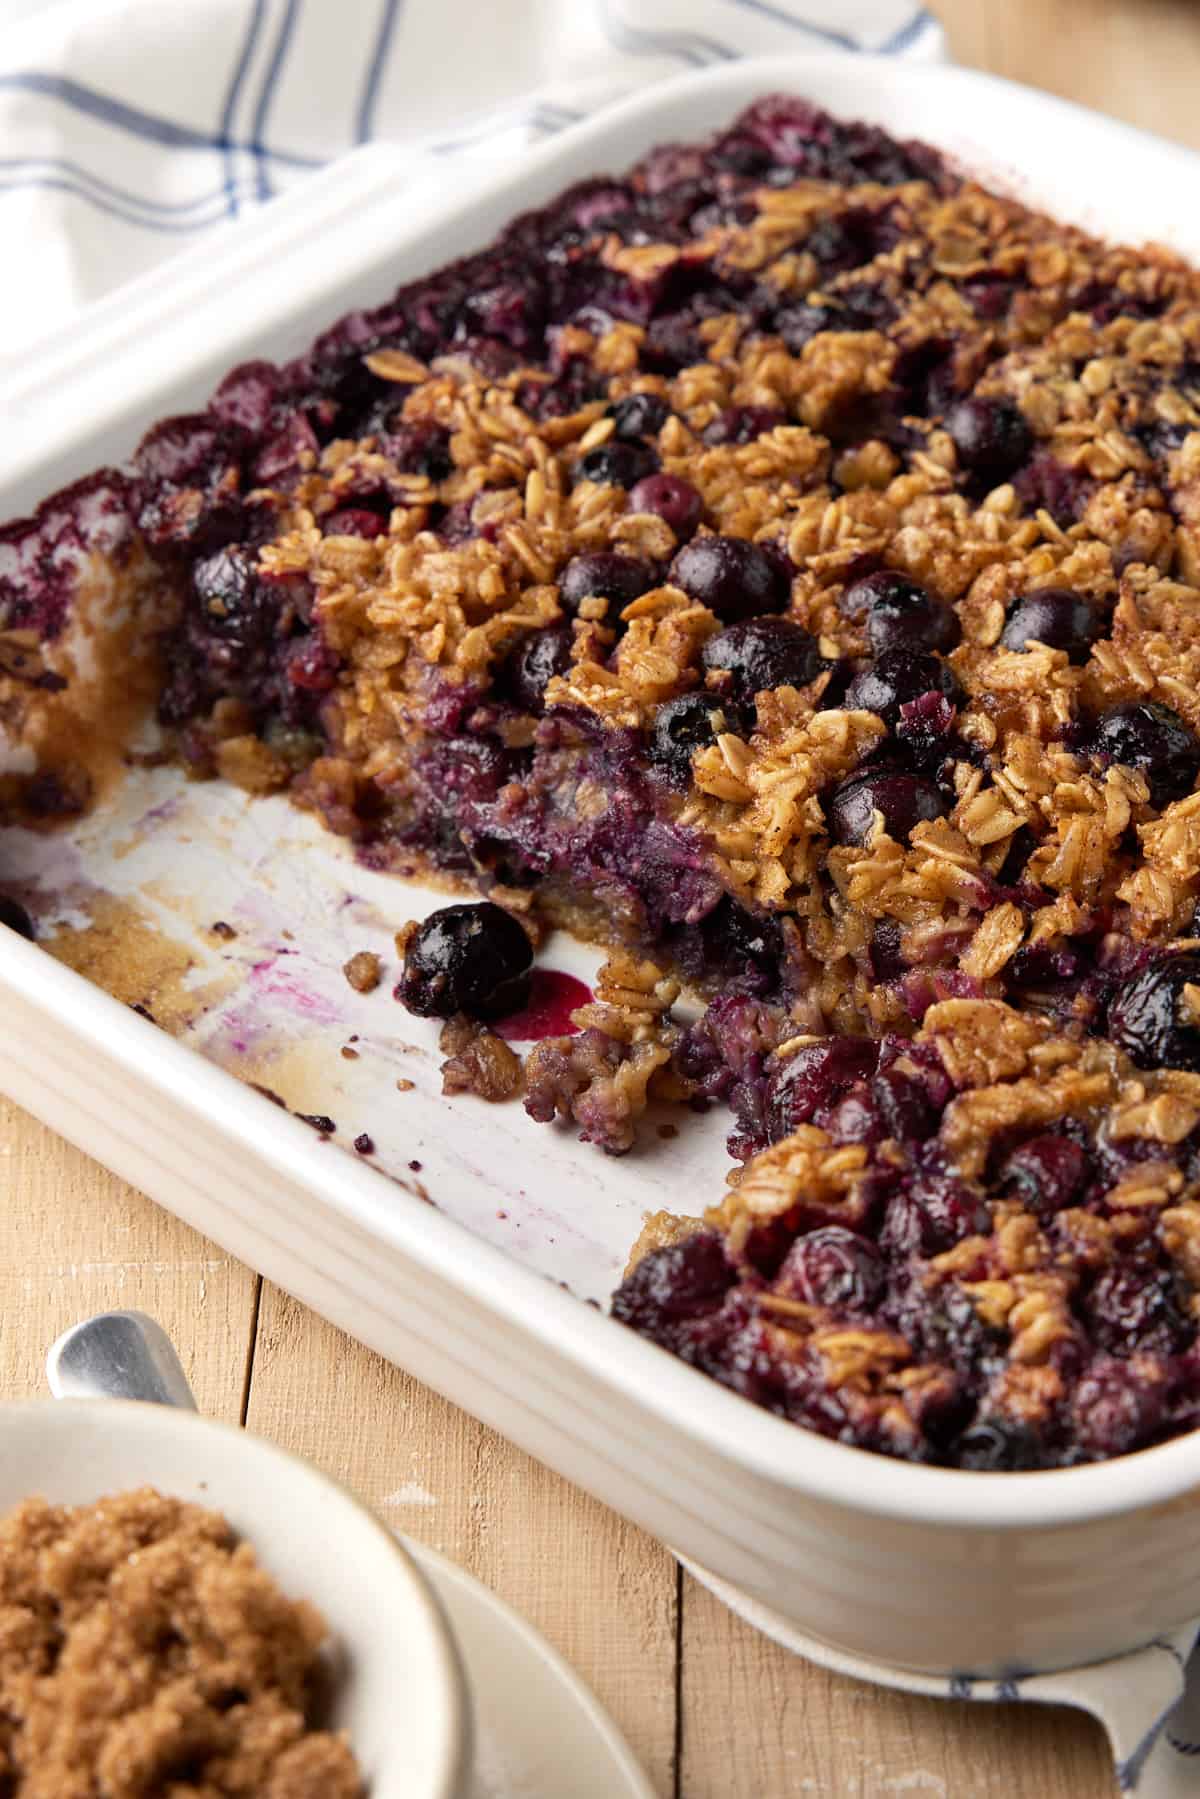 Baked oatmeal in white dish with blueberries.